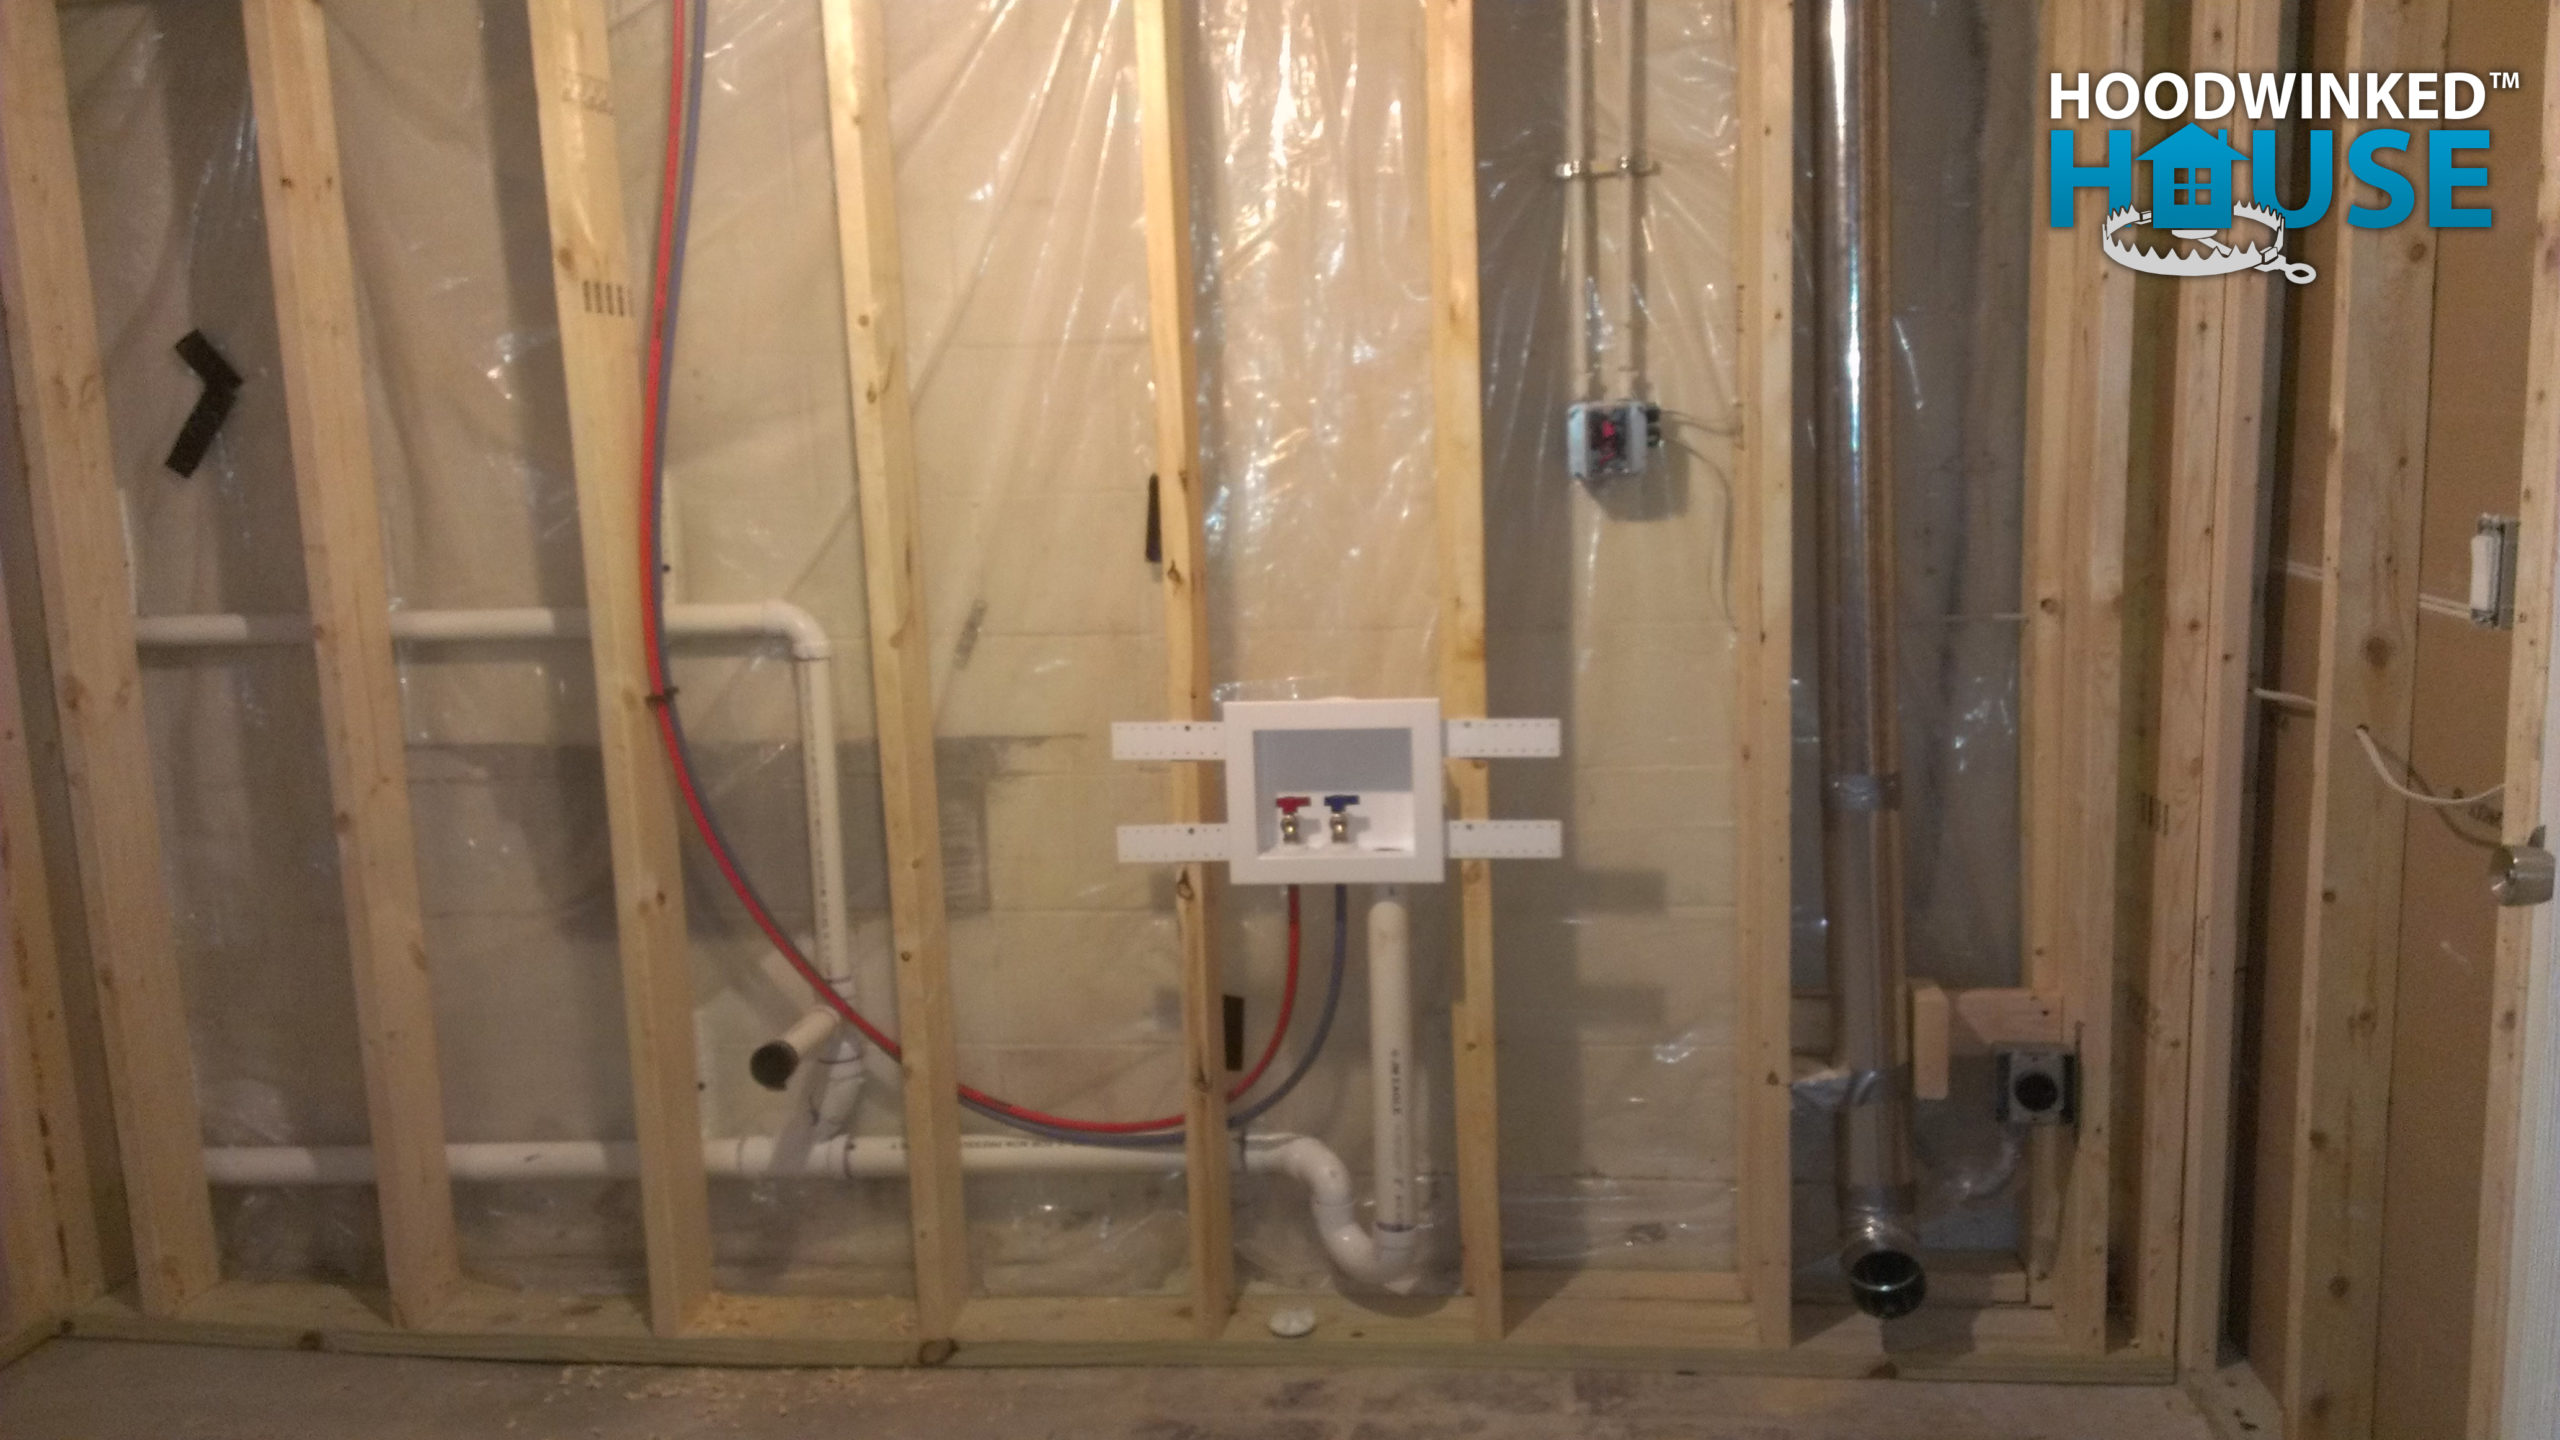 Laundry room framing with plumbing and a dryer vent.